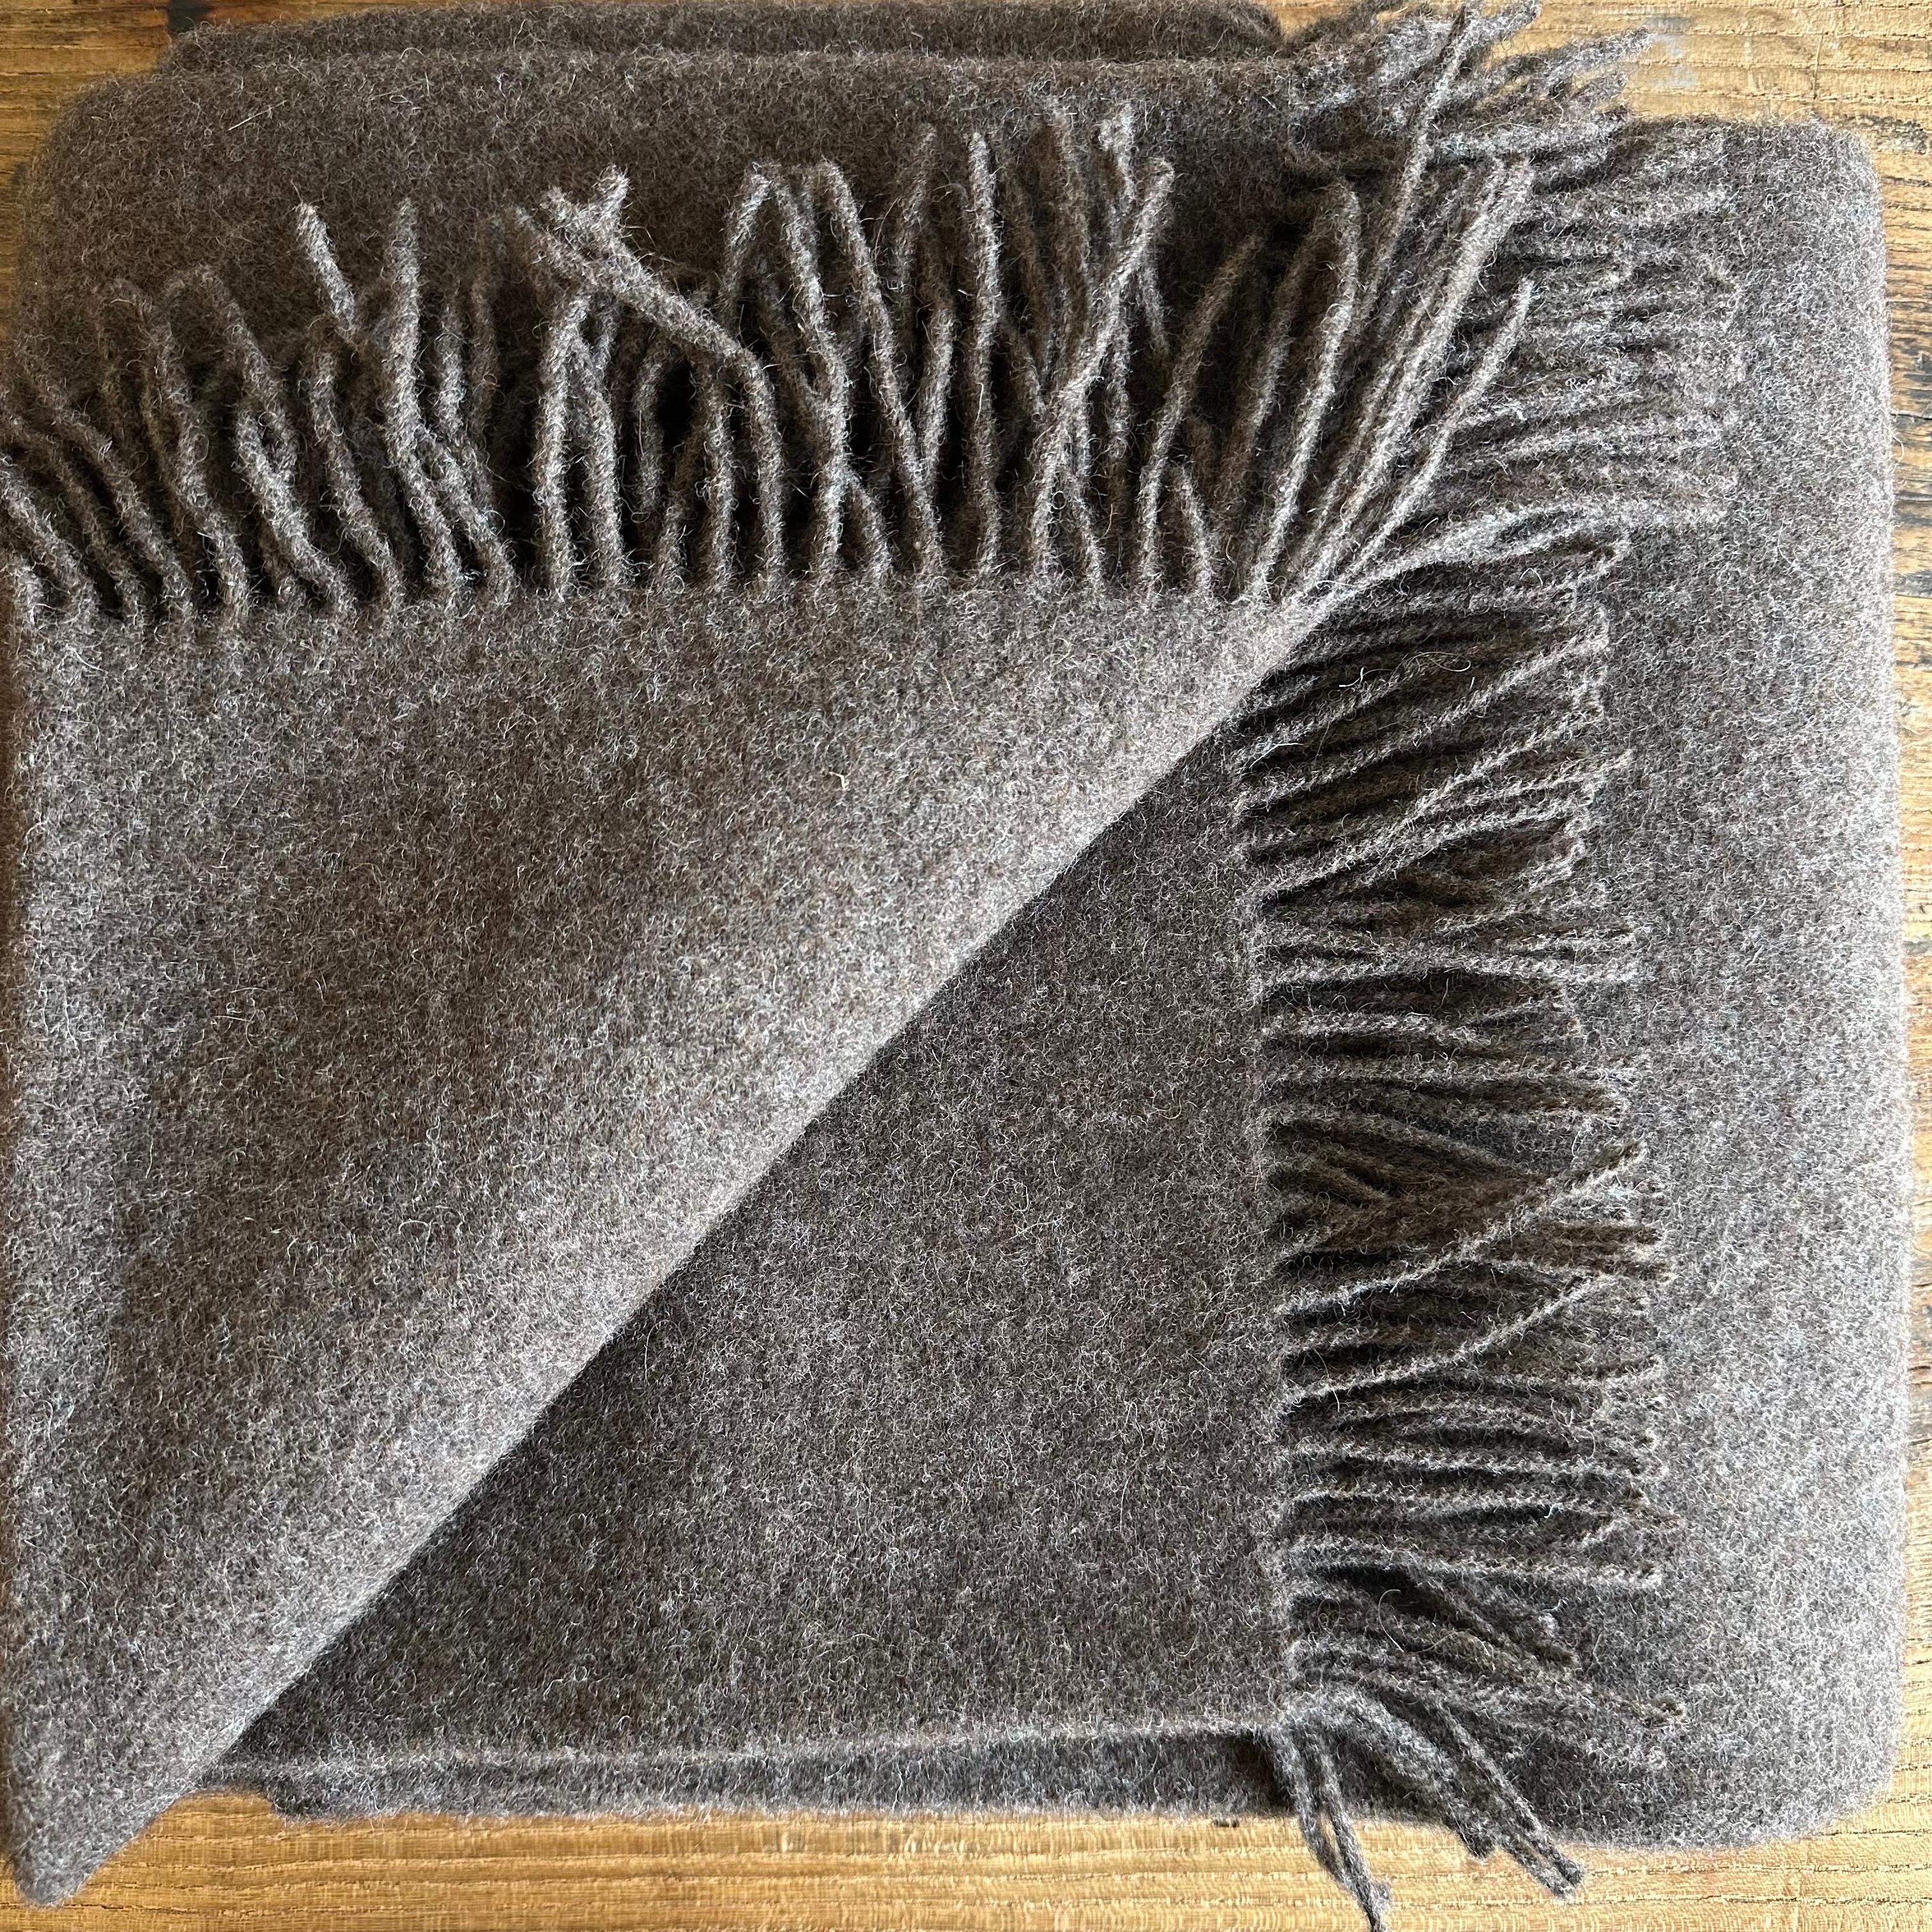 Lithuanian Mason Plush Alpaca Wool Throw with Fringe in Dark Coco For Sale